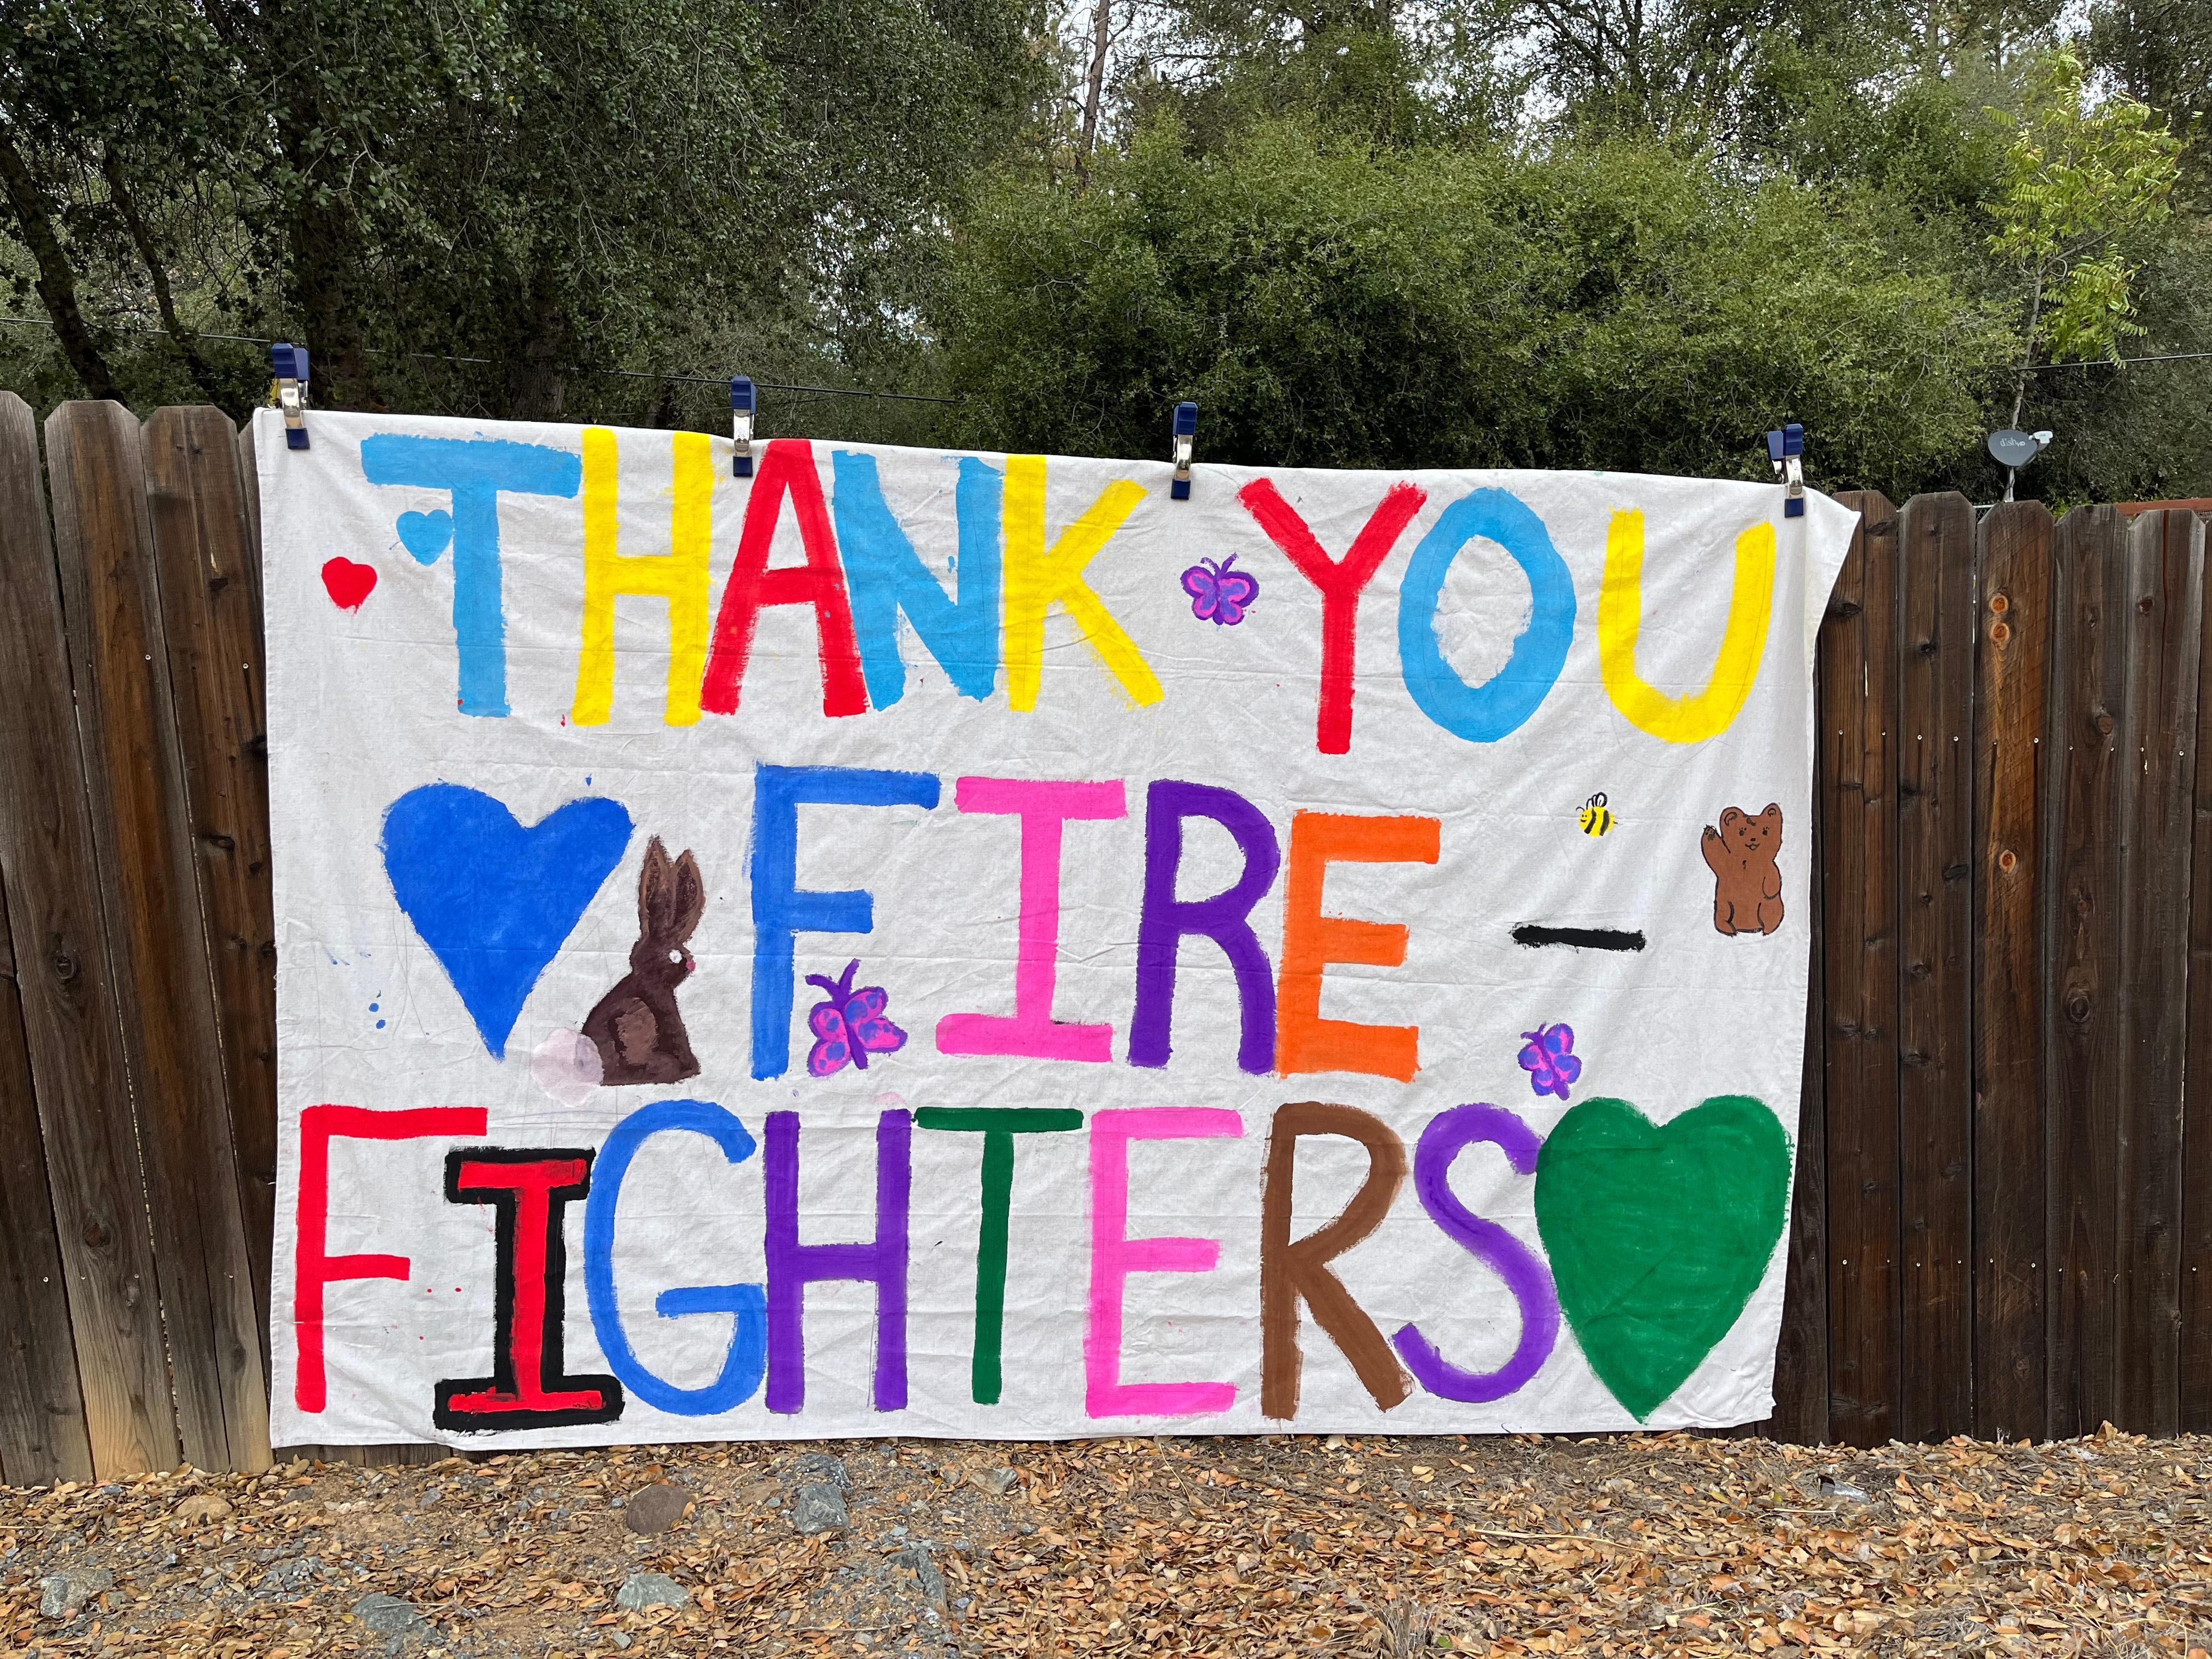 Thank You Firefighters says a colorful hand-painted sign hanging on a fence for firefighters to see